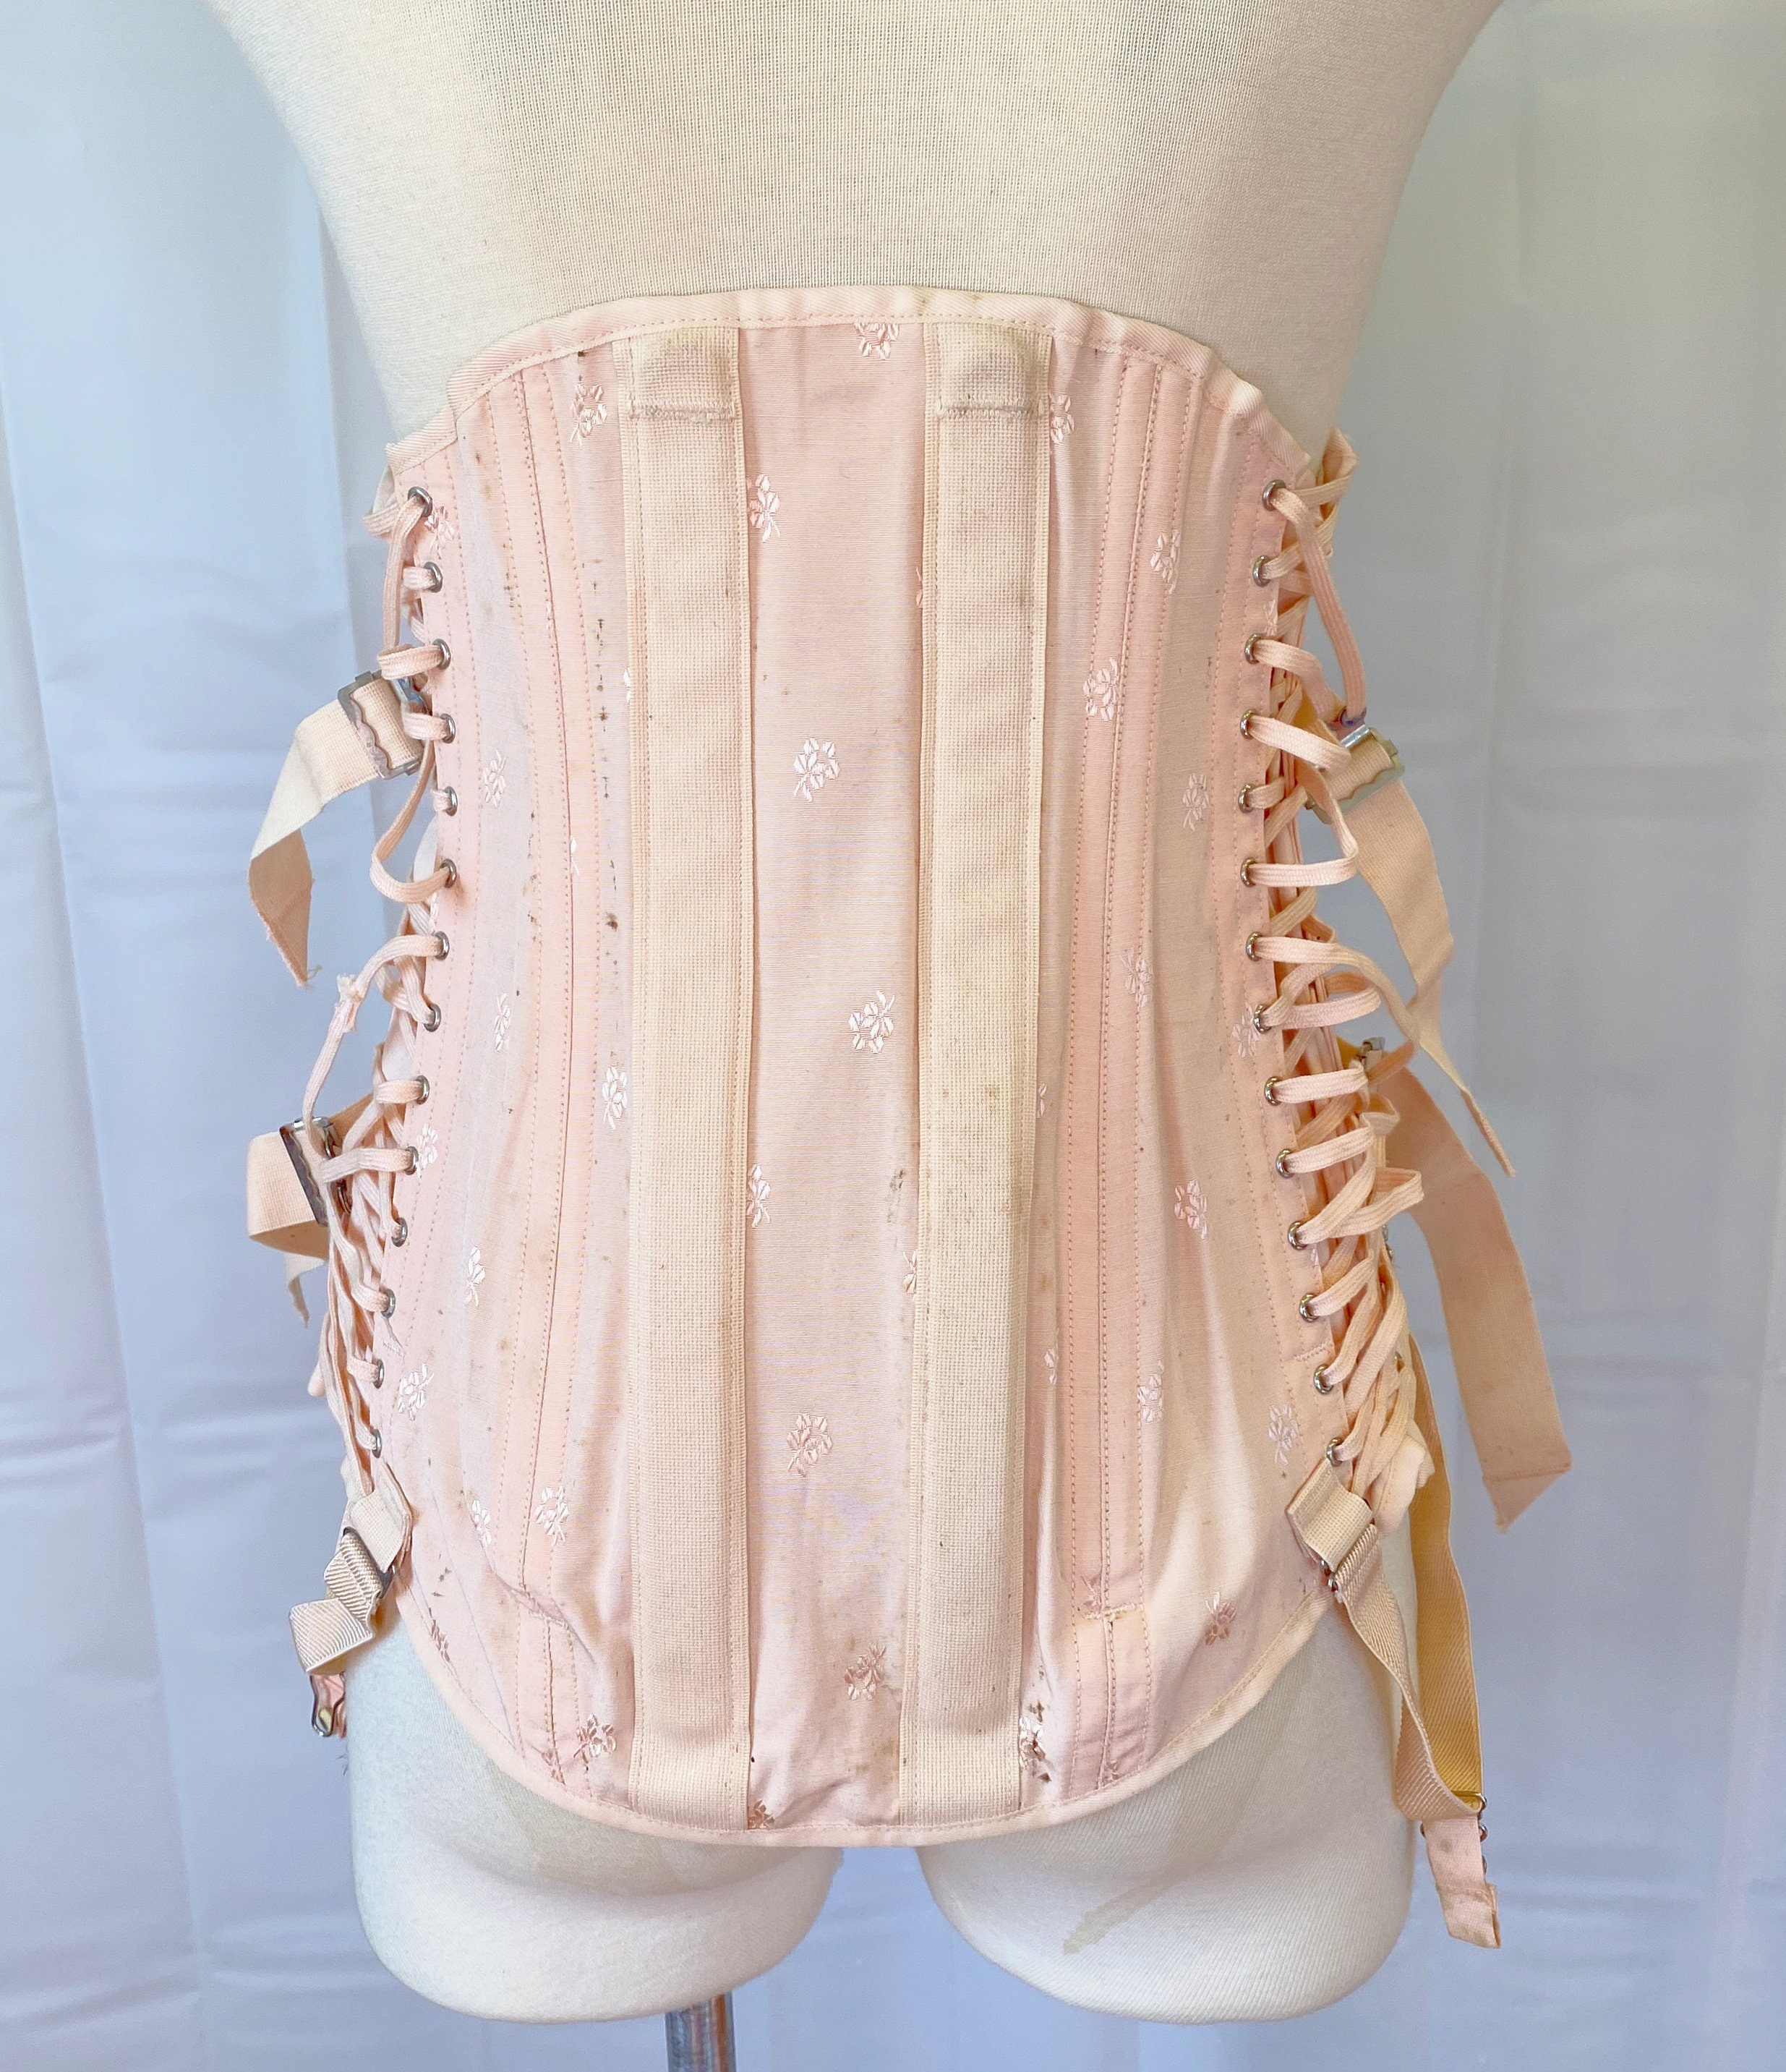 Vintage Boned Corset Girdle 1940s Waist Trainer With Garters Adjustable Fan  Laced Waist Cincher Small Medium Camp Style -  Canada